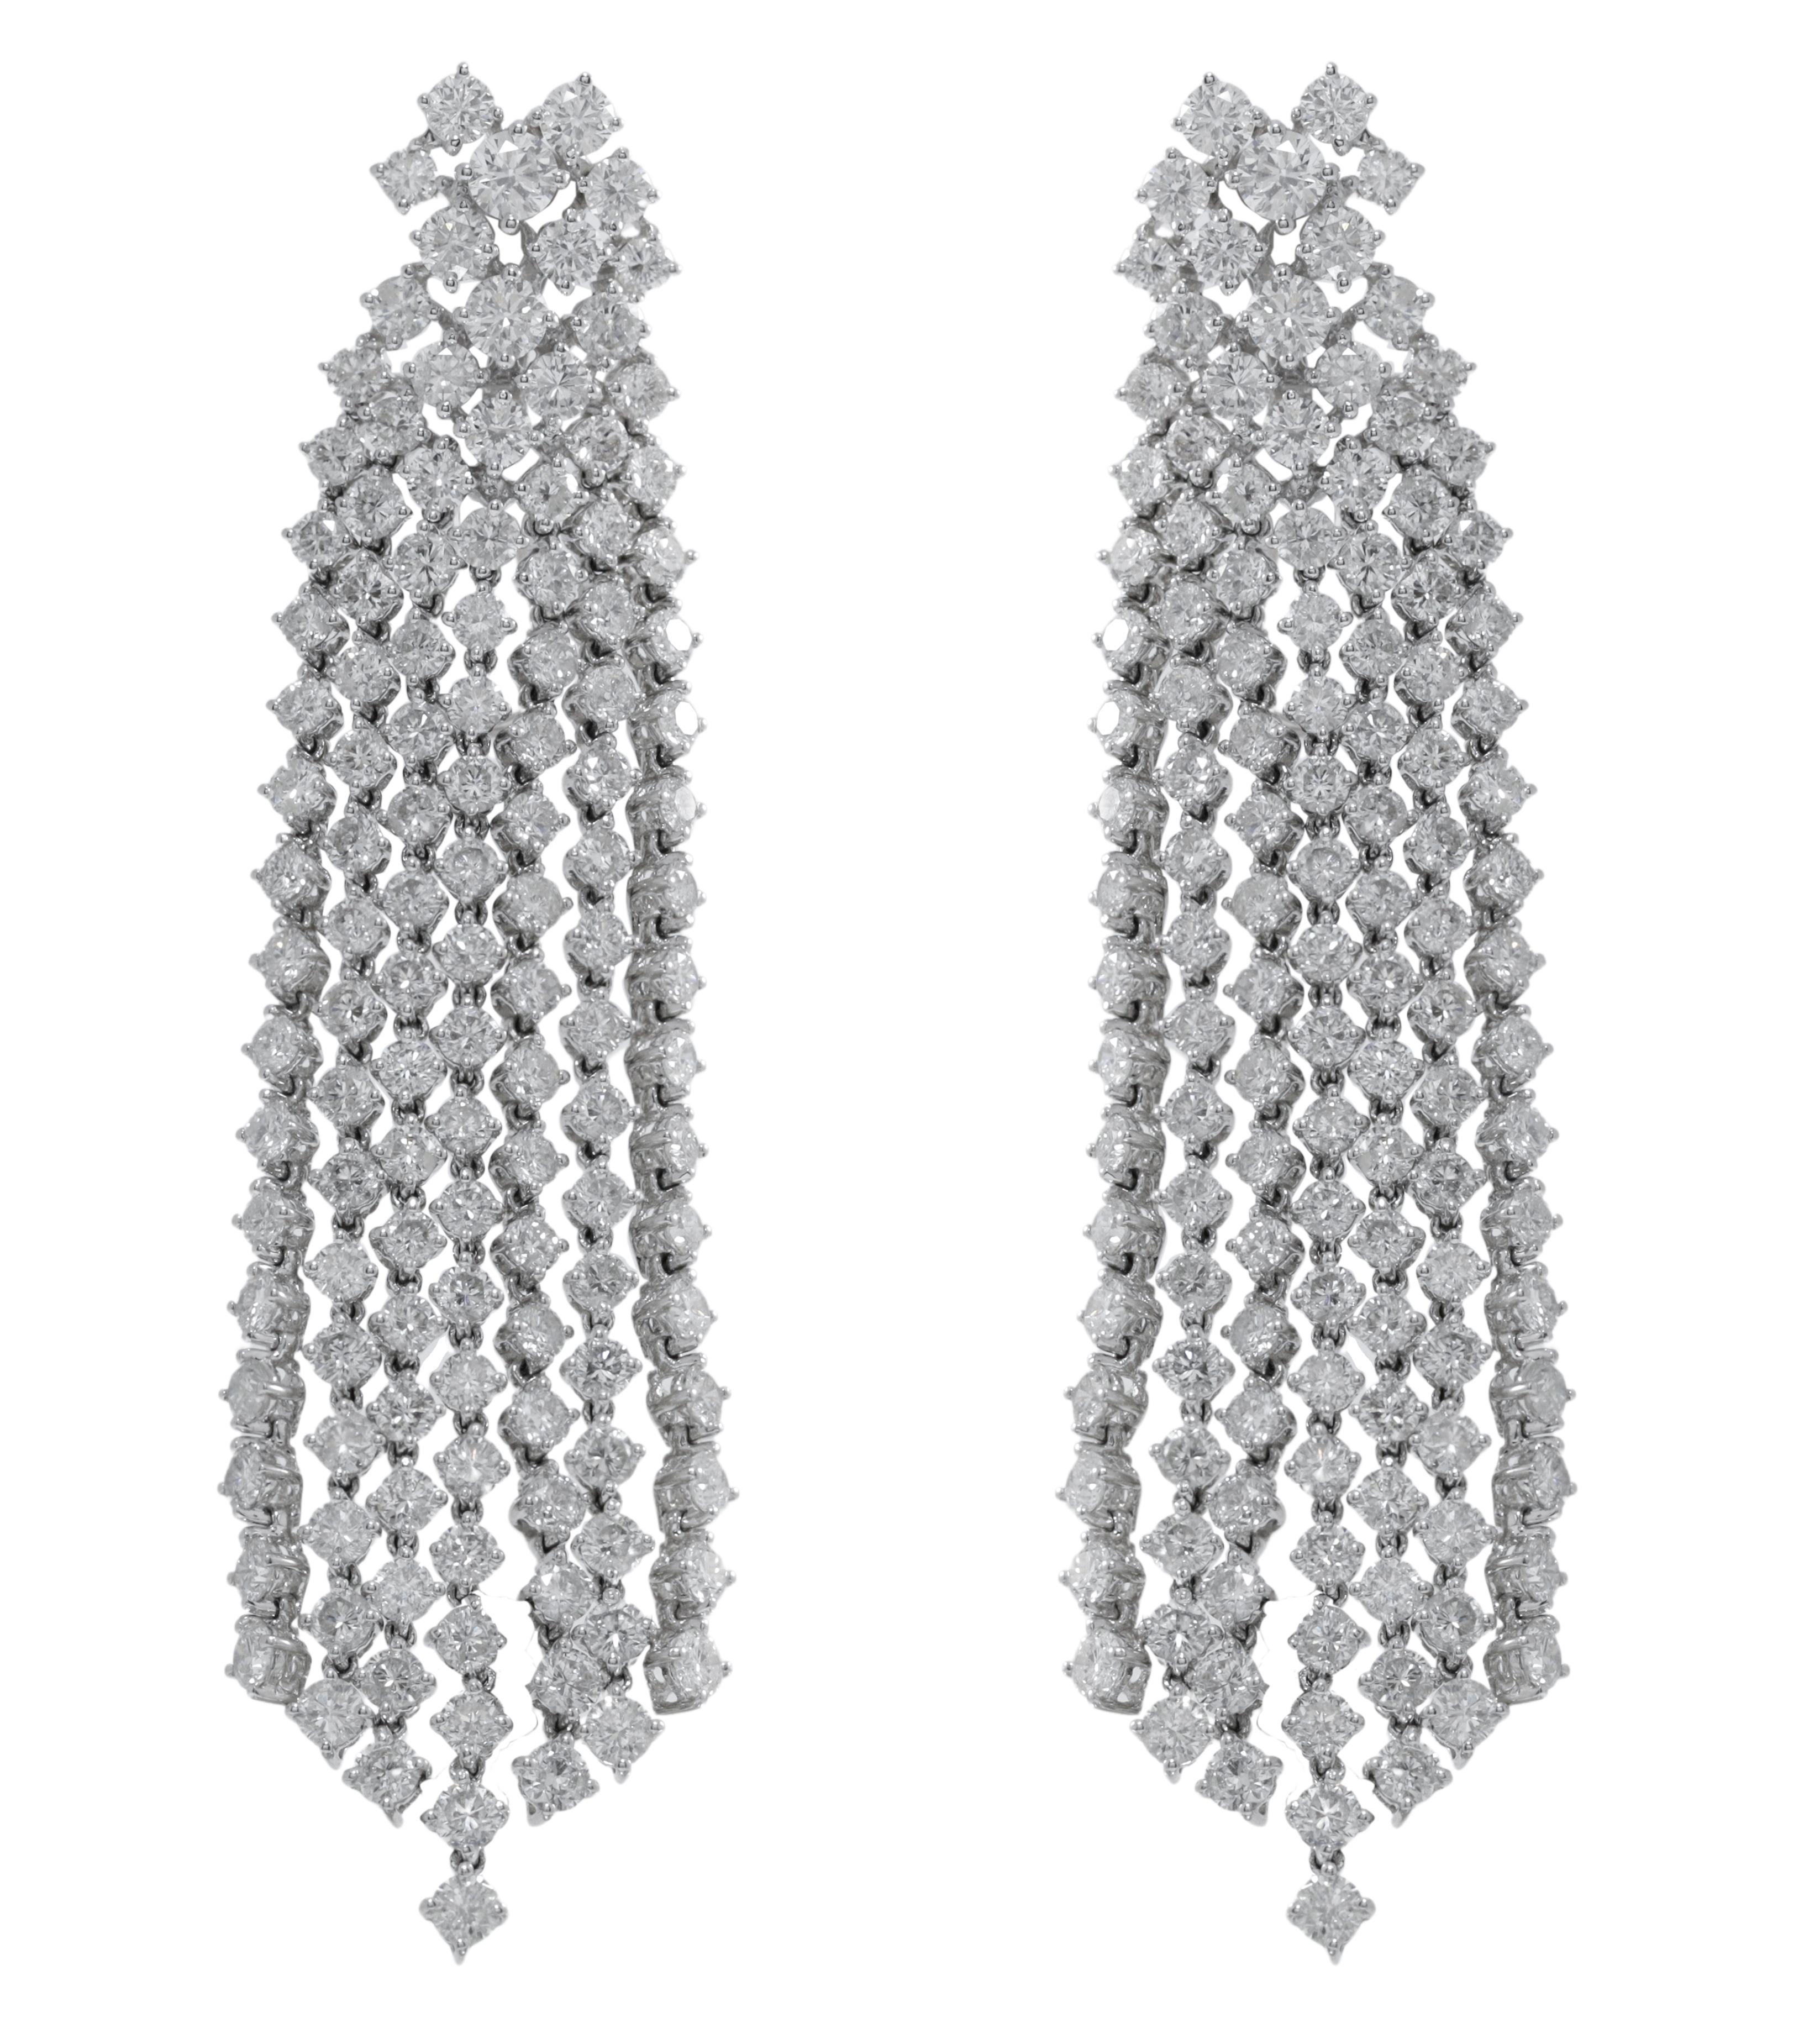 18K White Gold Diamond Earrings featuring 17.40 Carat T.W. of Natural Diamonds

Underline your look with this sharp 18K White Gold Diamond Earrings. High quality Diamonds. This Earrings will underline your exquisite look for any occasion.

. is a